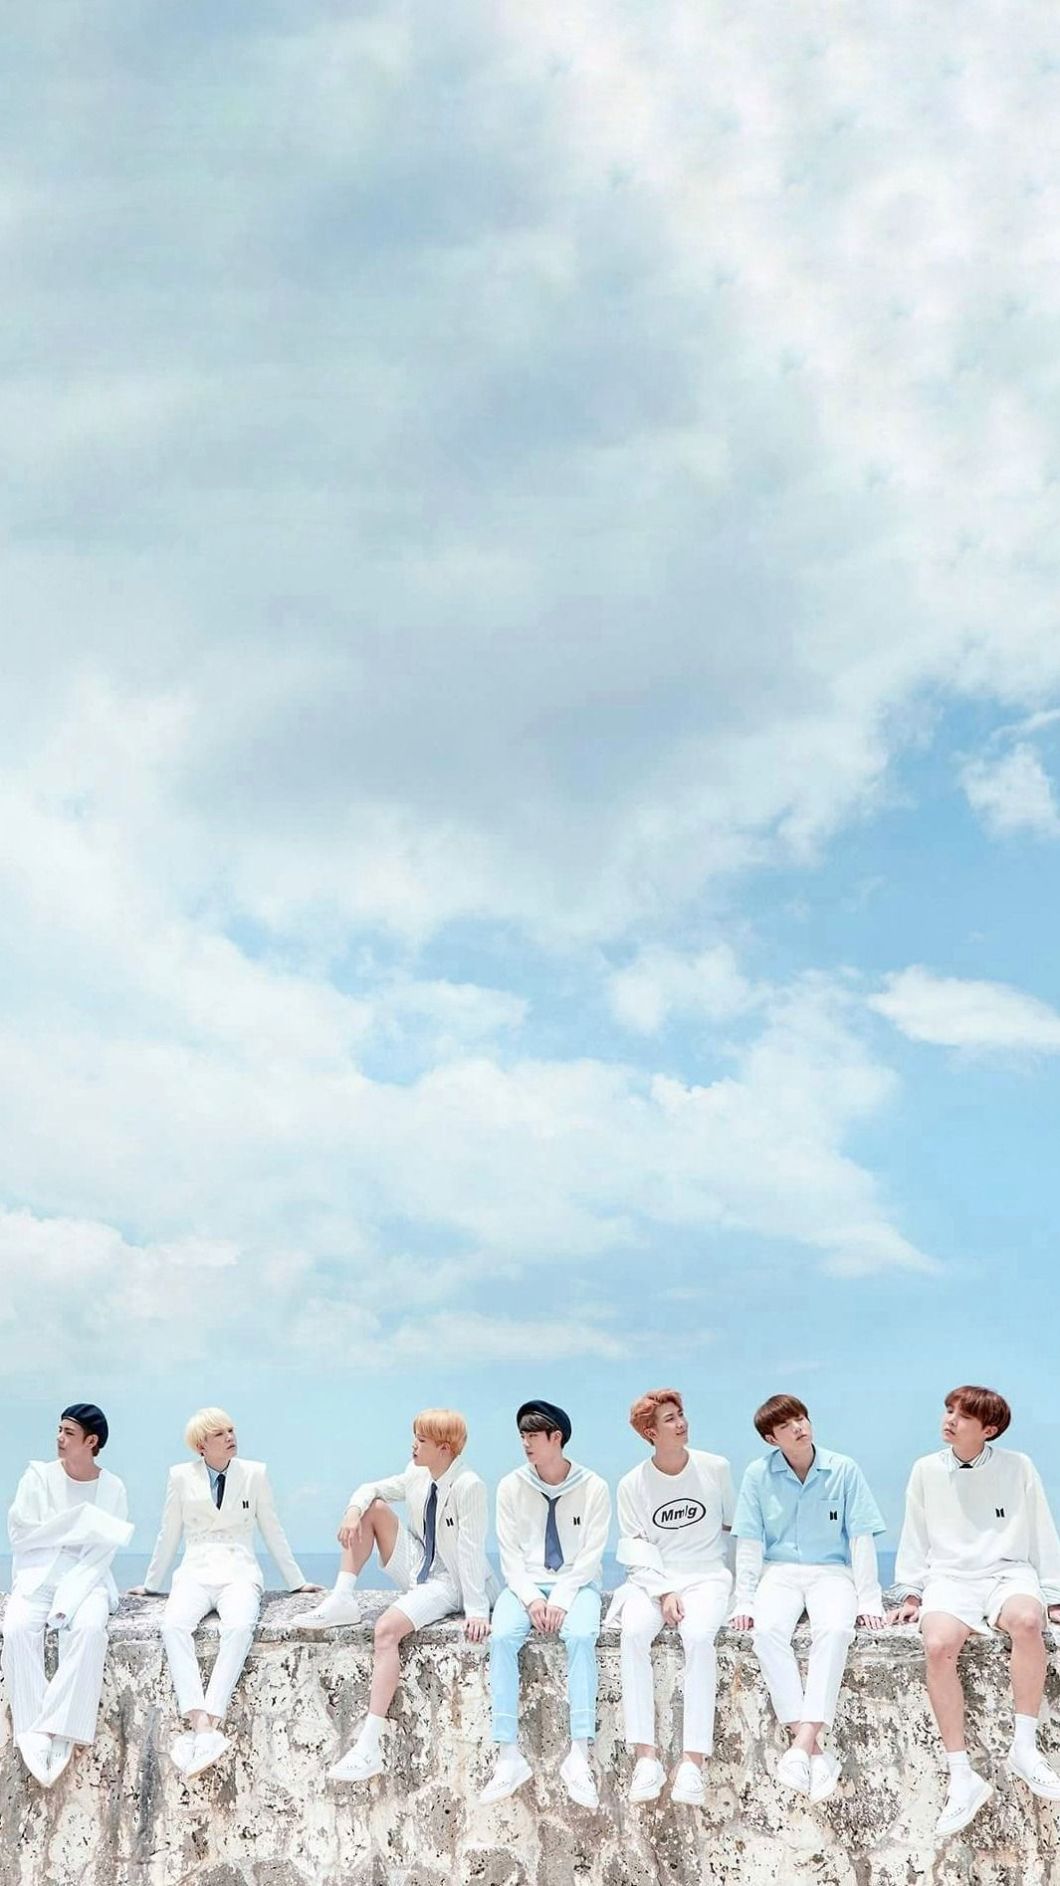 13 BTS 2019 Wallpapers For iPhone Android and Desktop